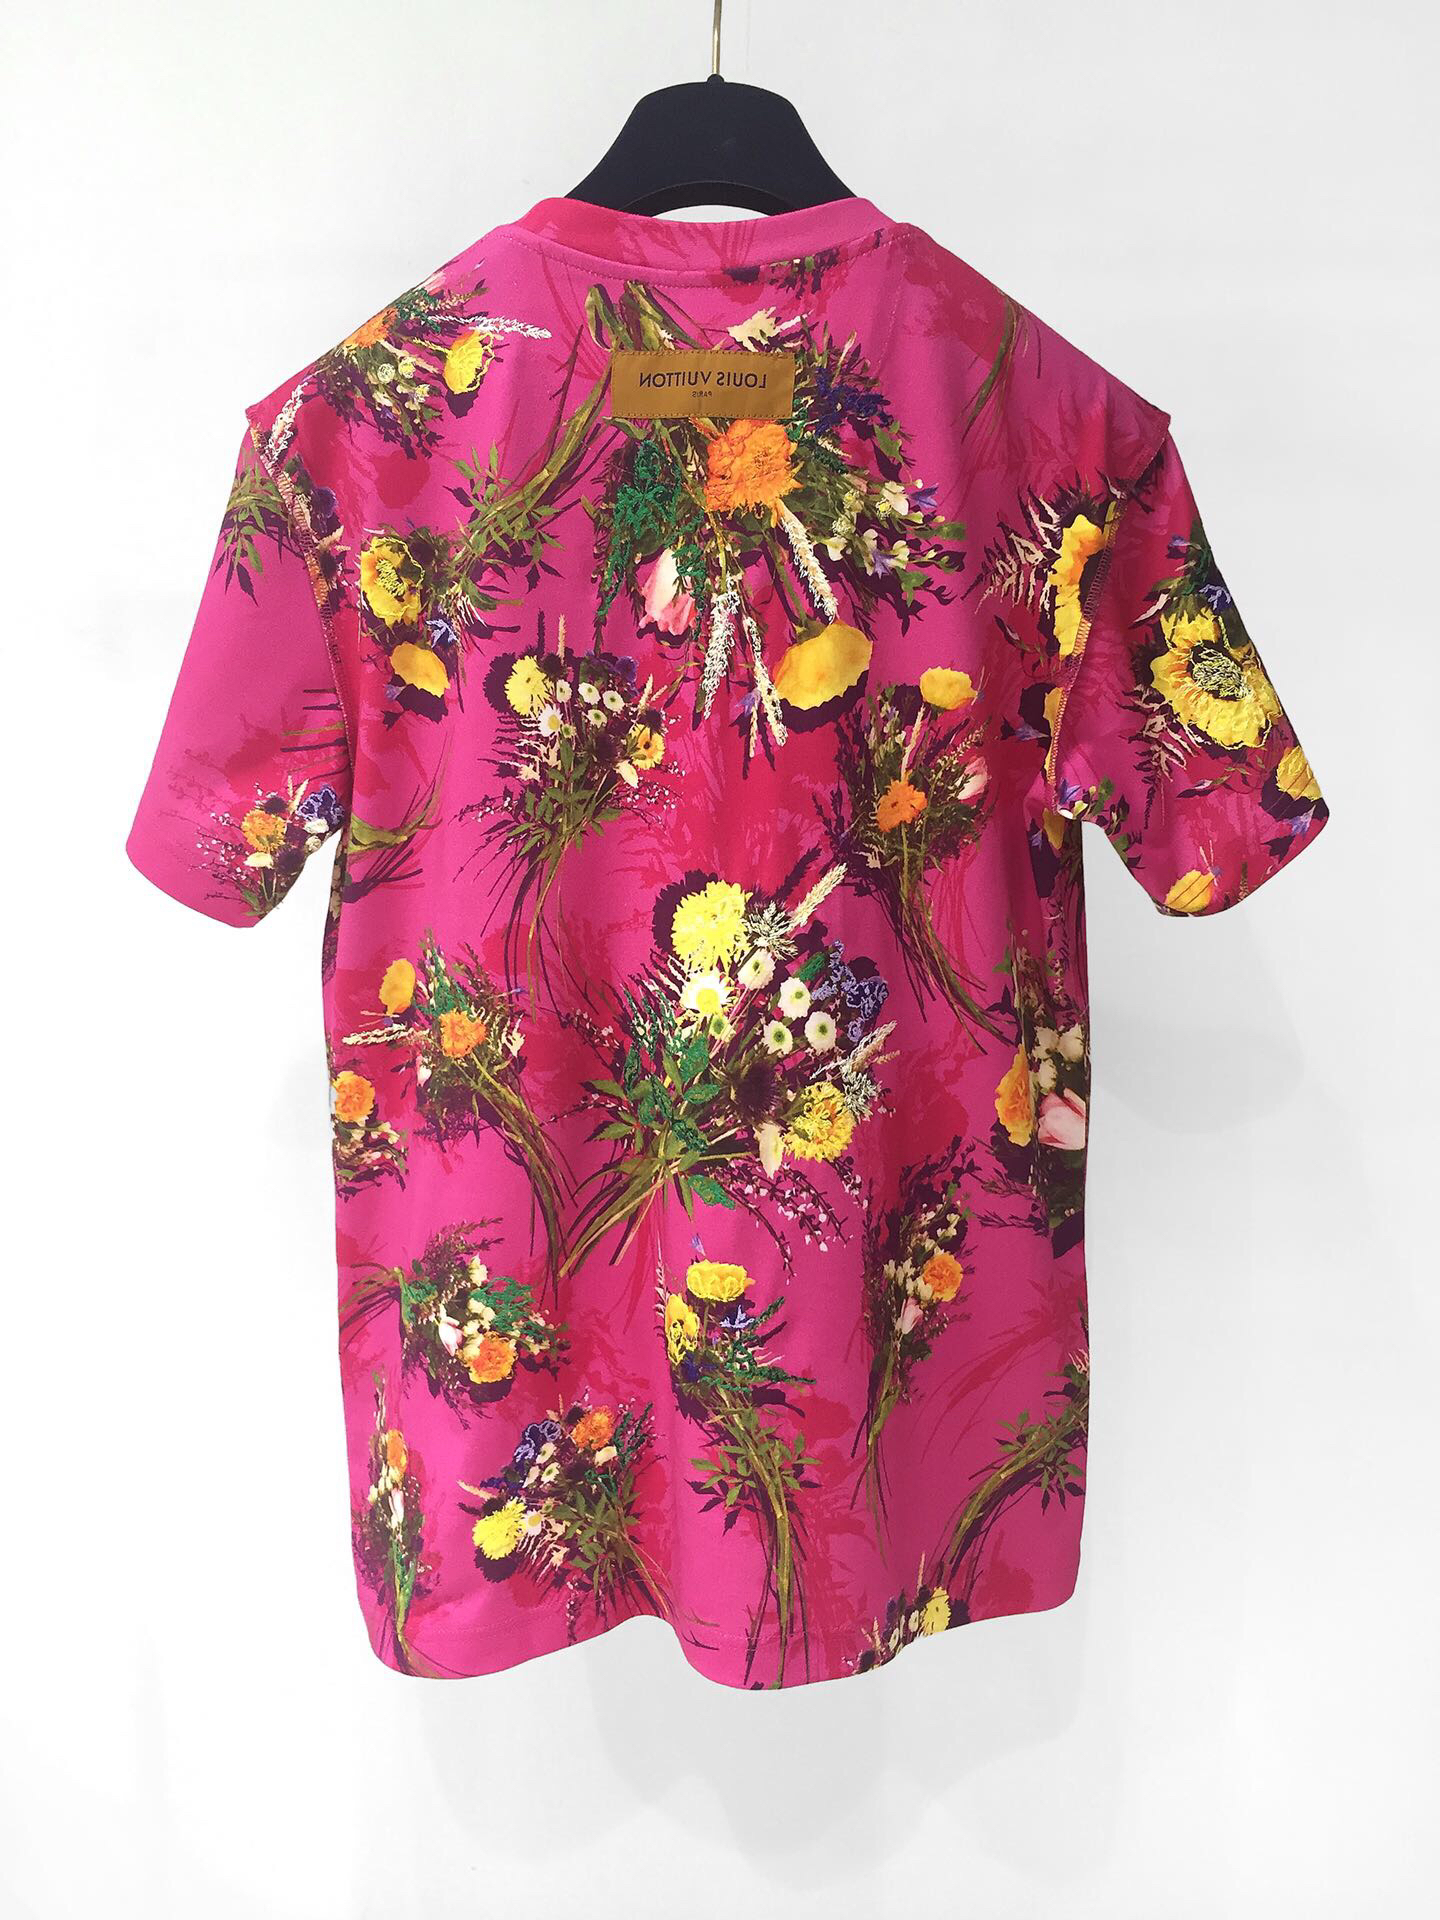 Louis Vuitton PRINTED AND EMBROIDERED FLOWERS T-SHIRT – billionairemart